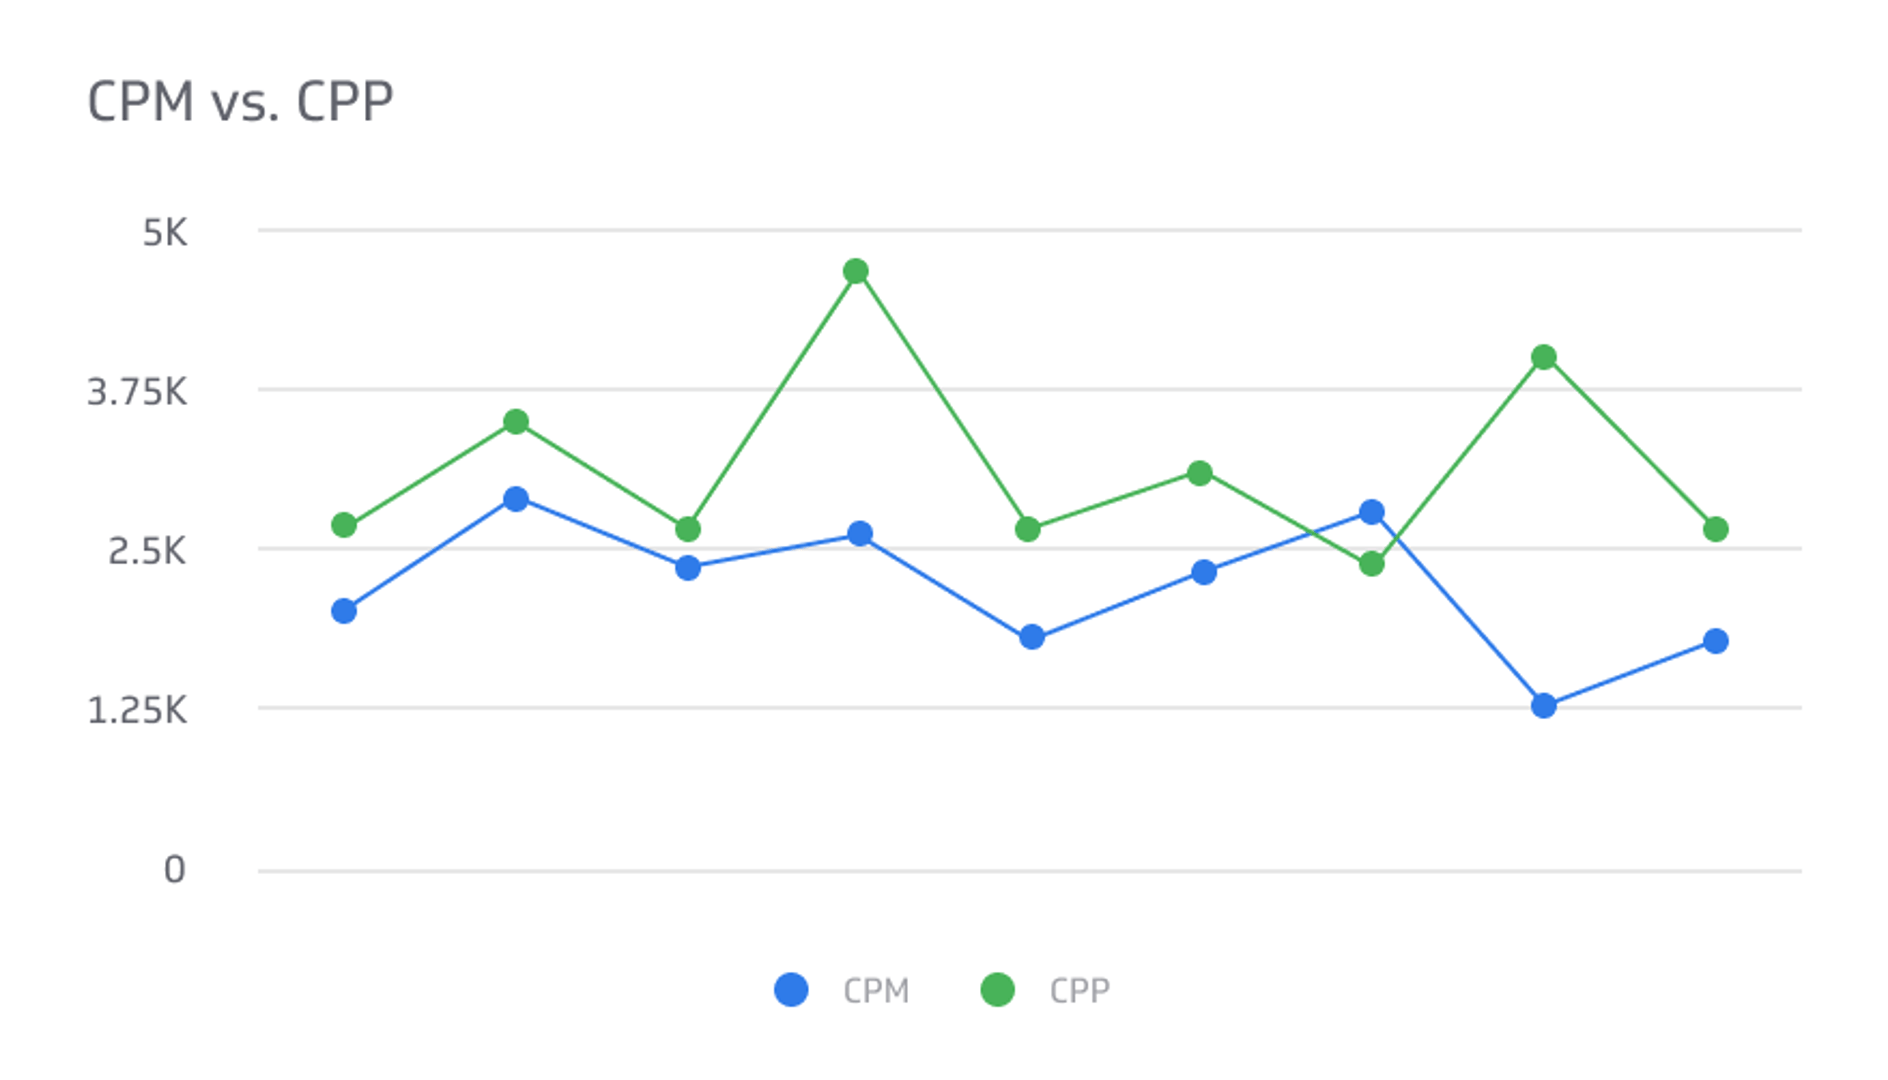 Social Media KPI Example - Facebook Ads: CPM and CPP Metric